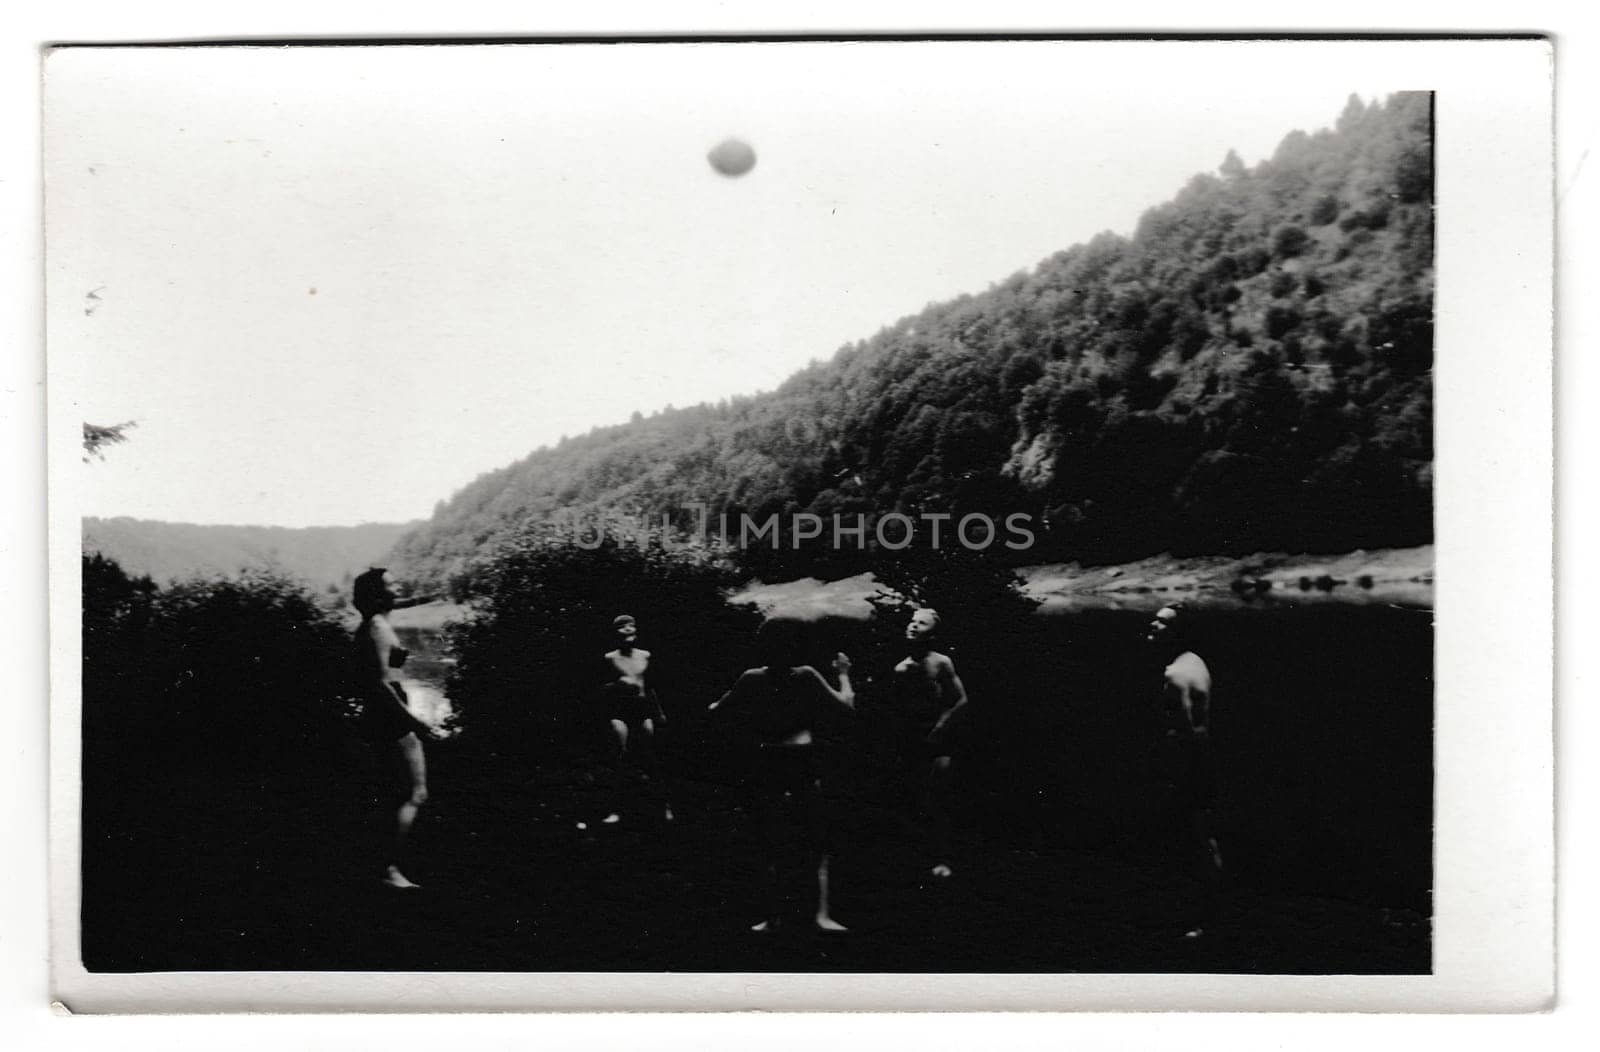 THE CZECHOSLOVAK SOCIALIST REPUBLIC - CIRCA 1950s: Retro photo shows people on the vacation. Young people play with ball. Summer holiday theme. Vintage black and white photography.